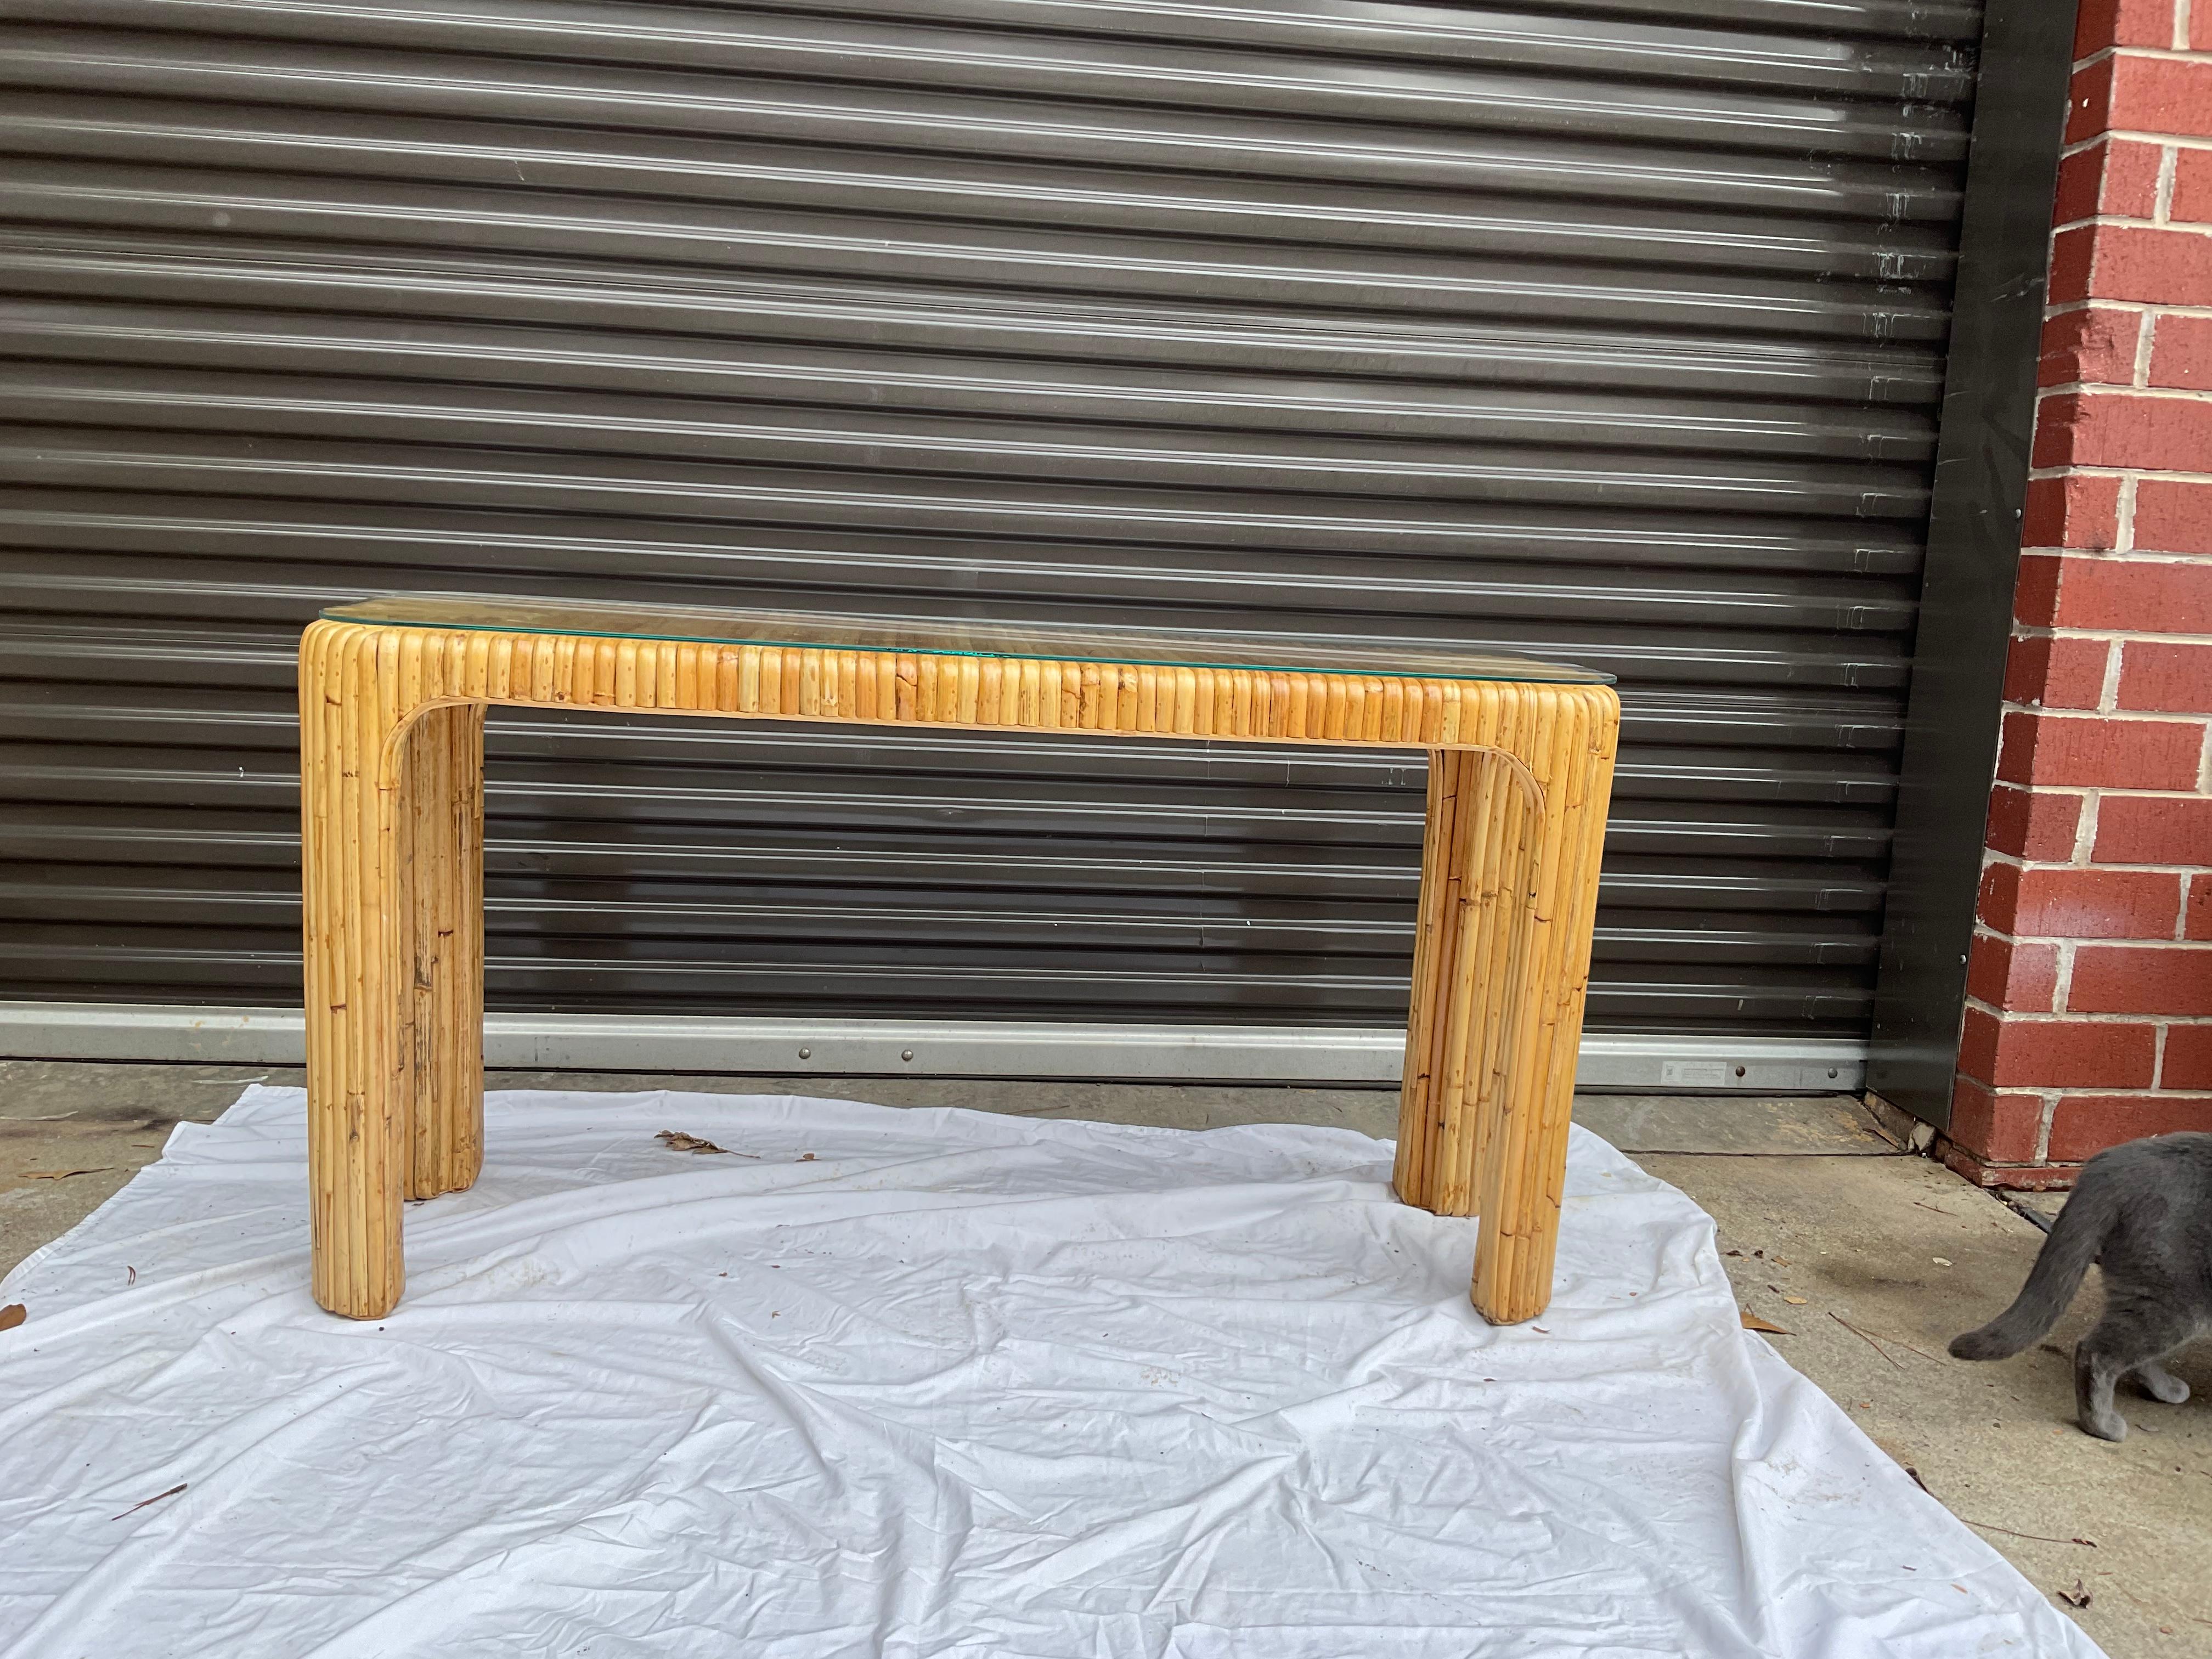 Classic split/ reed rattan console table, with a waterfall style. Custom glass top is included. Could be used with any number of decor styles.